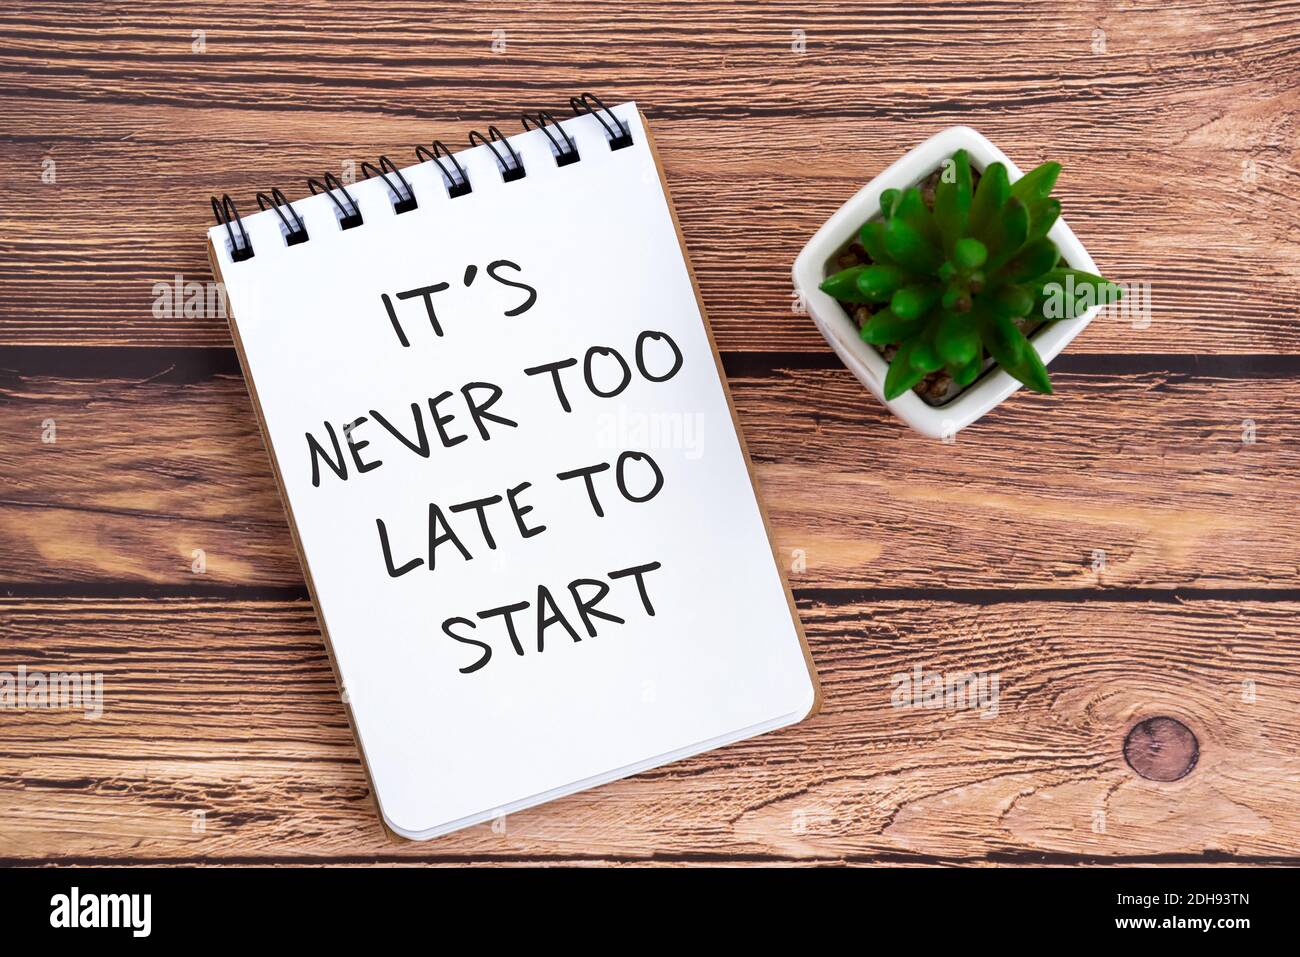 Inspirational quotes on note pad - Its never too late to start. Stock Photo